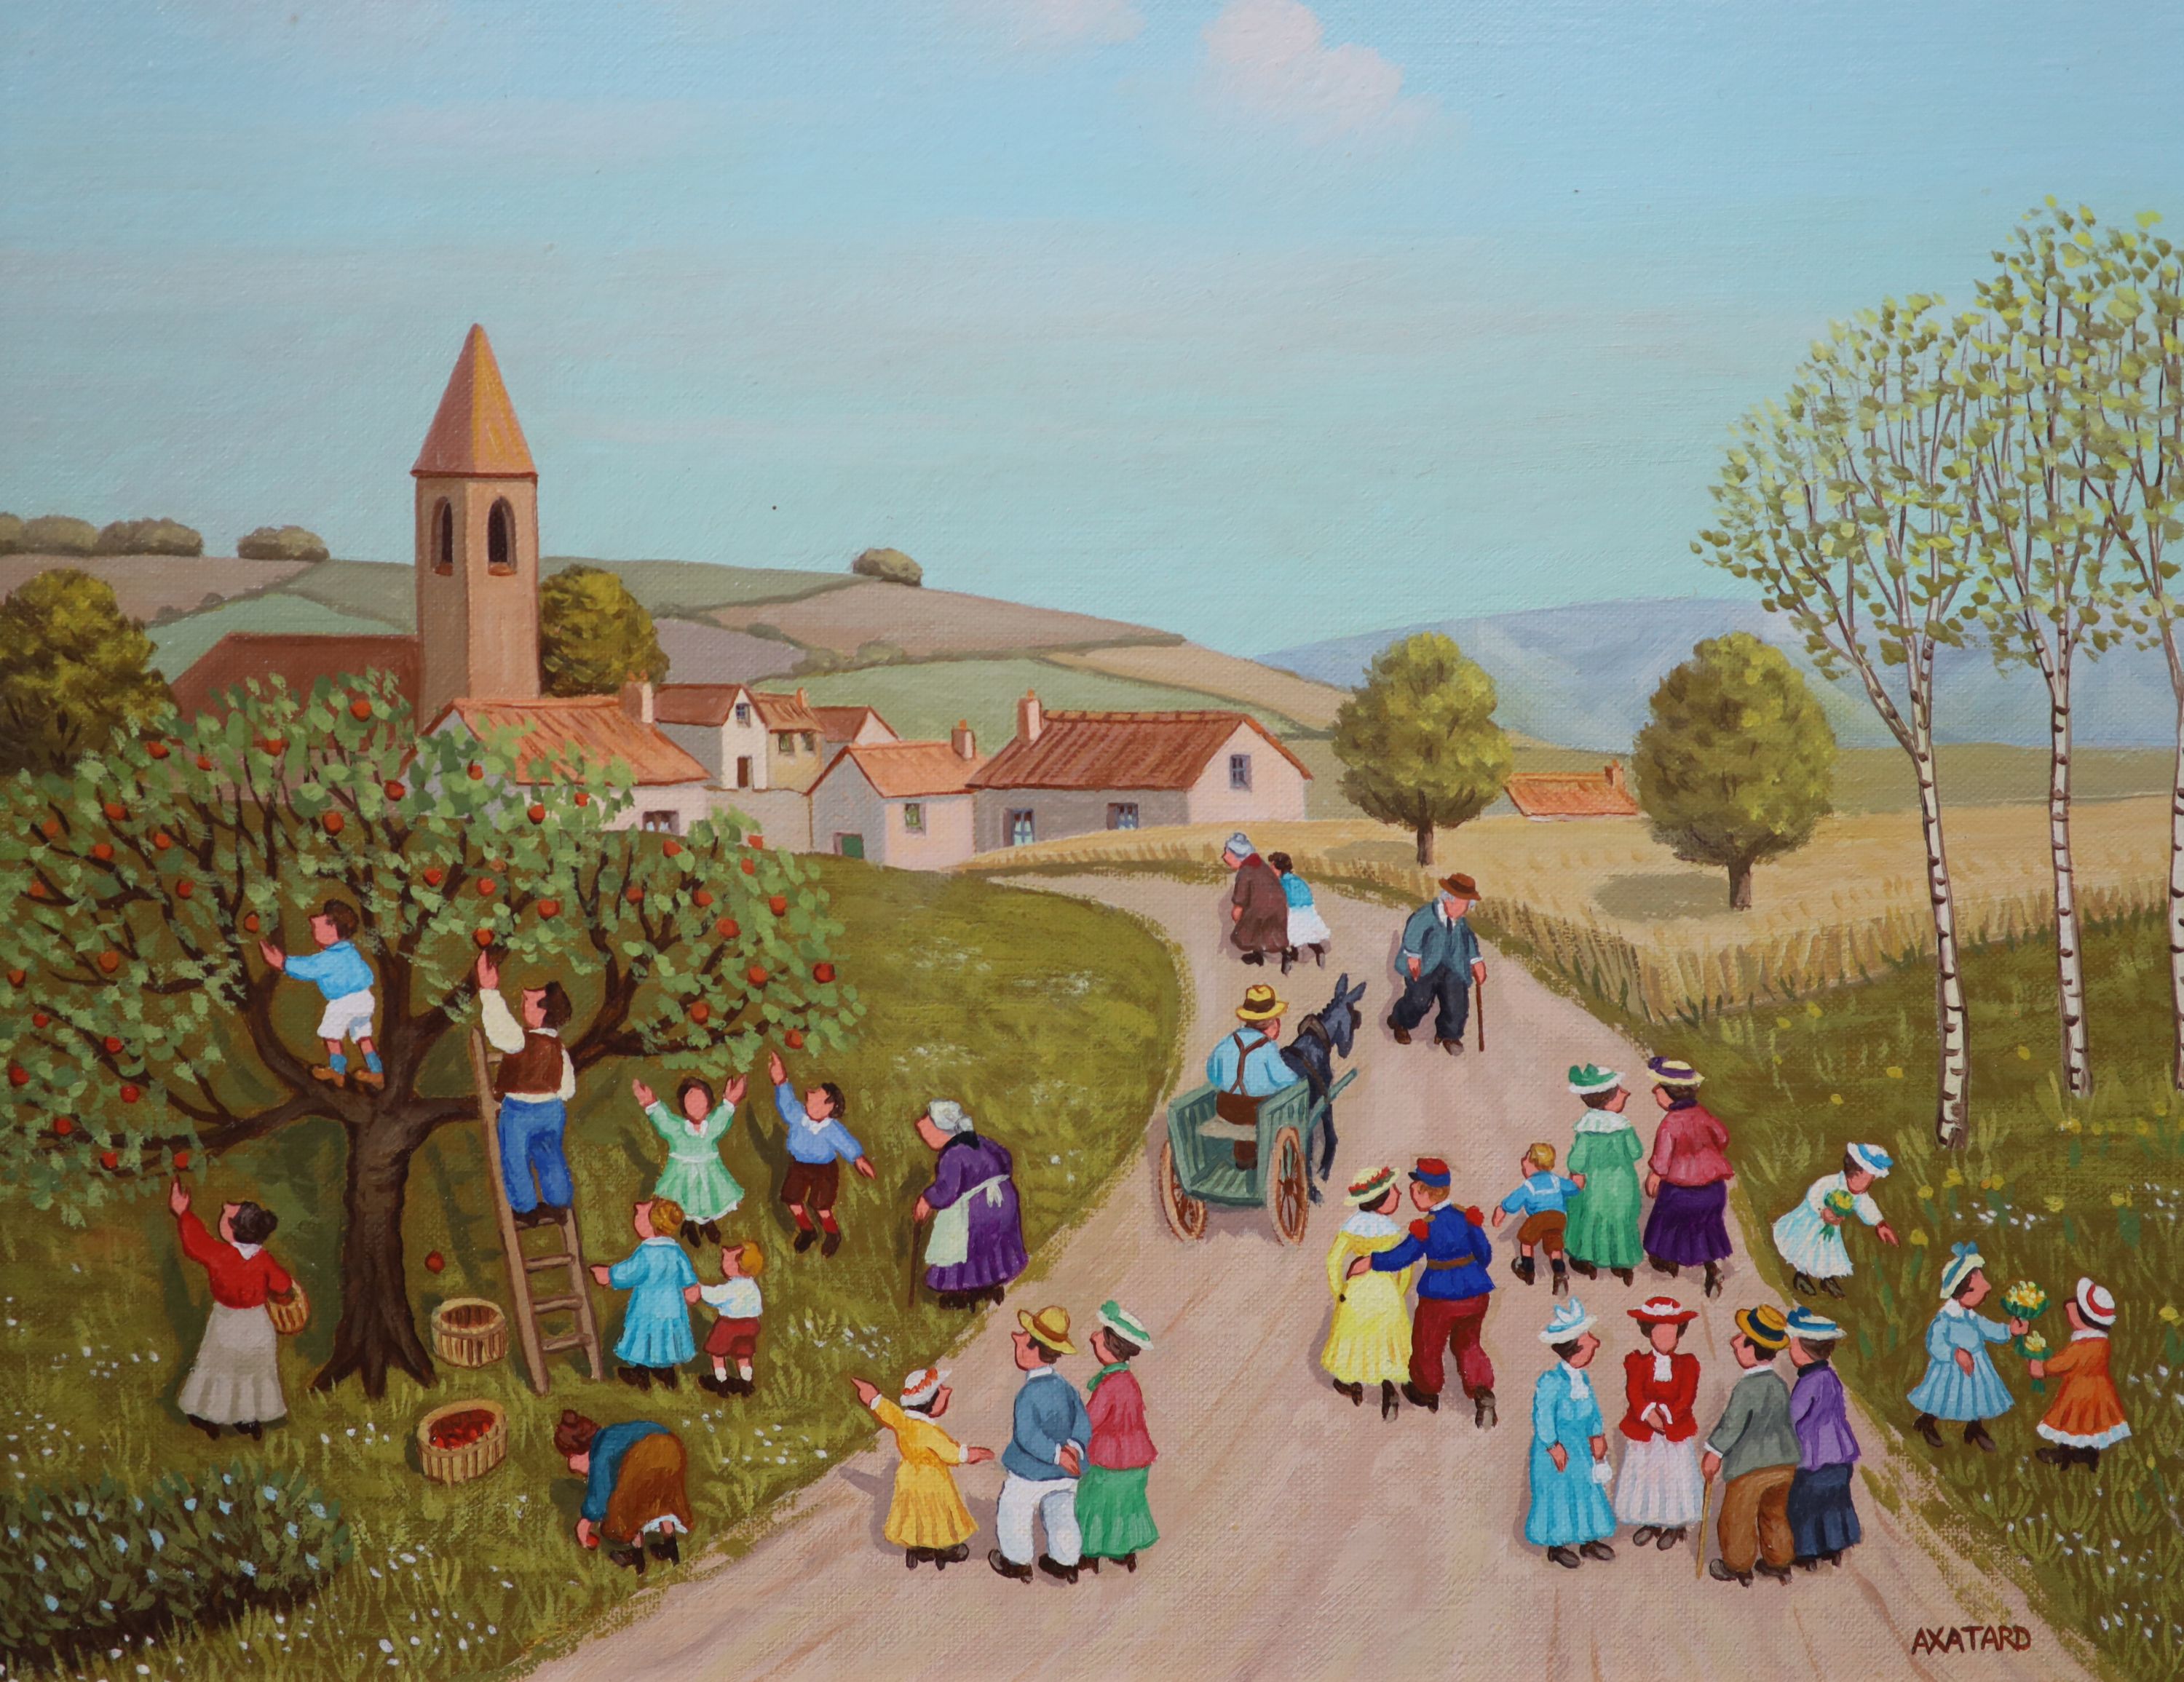 Jean Axatard (b.1931), Saturday Morning Skaters & The Fruit Pickers, Oil on canvas, 21 x 25cm.